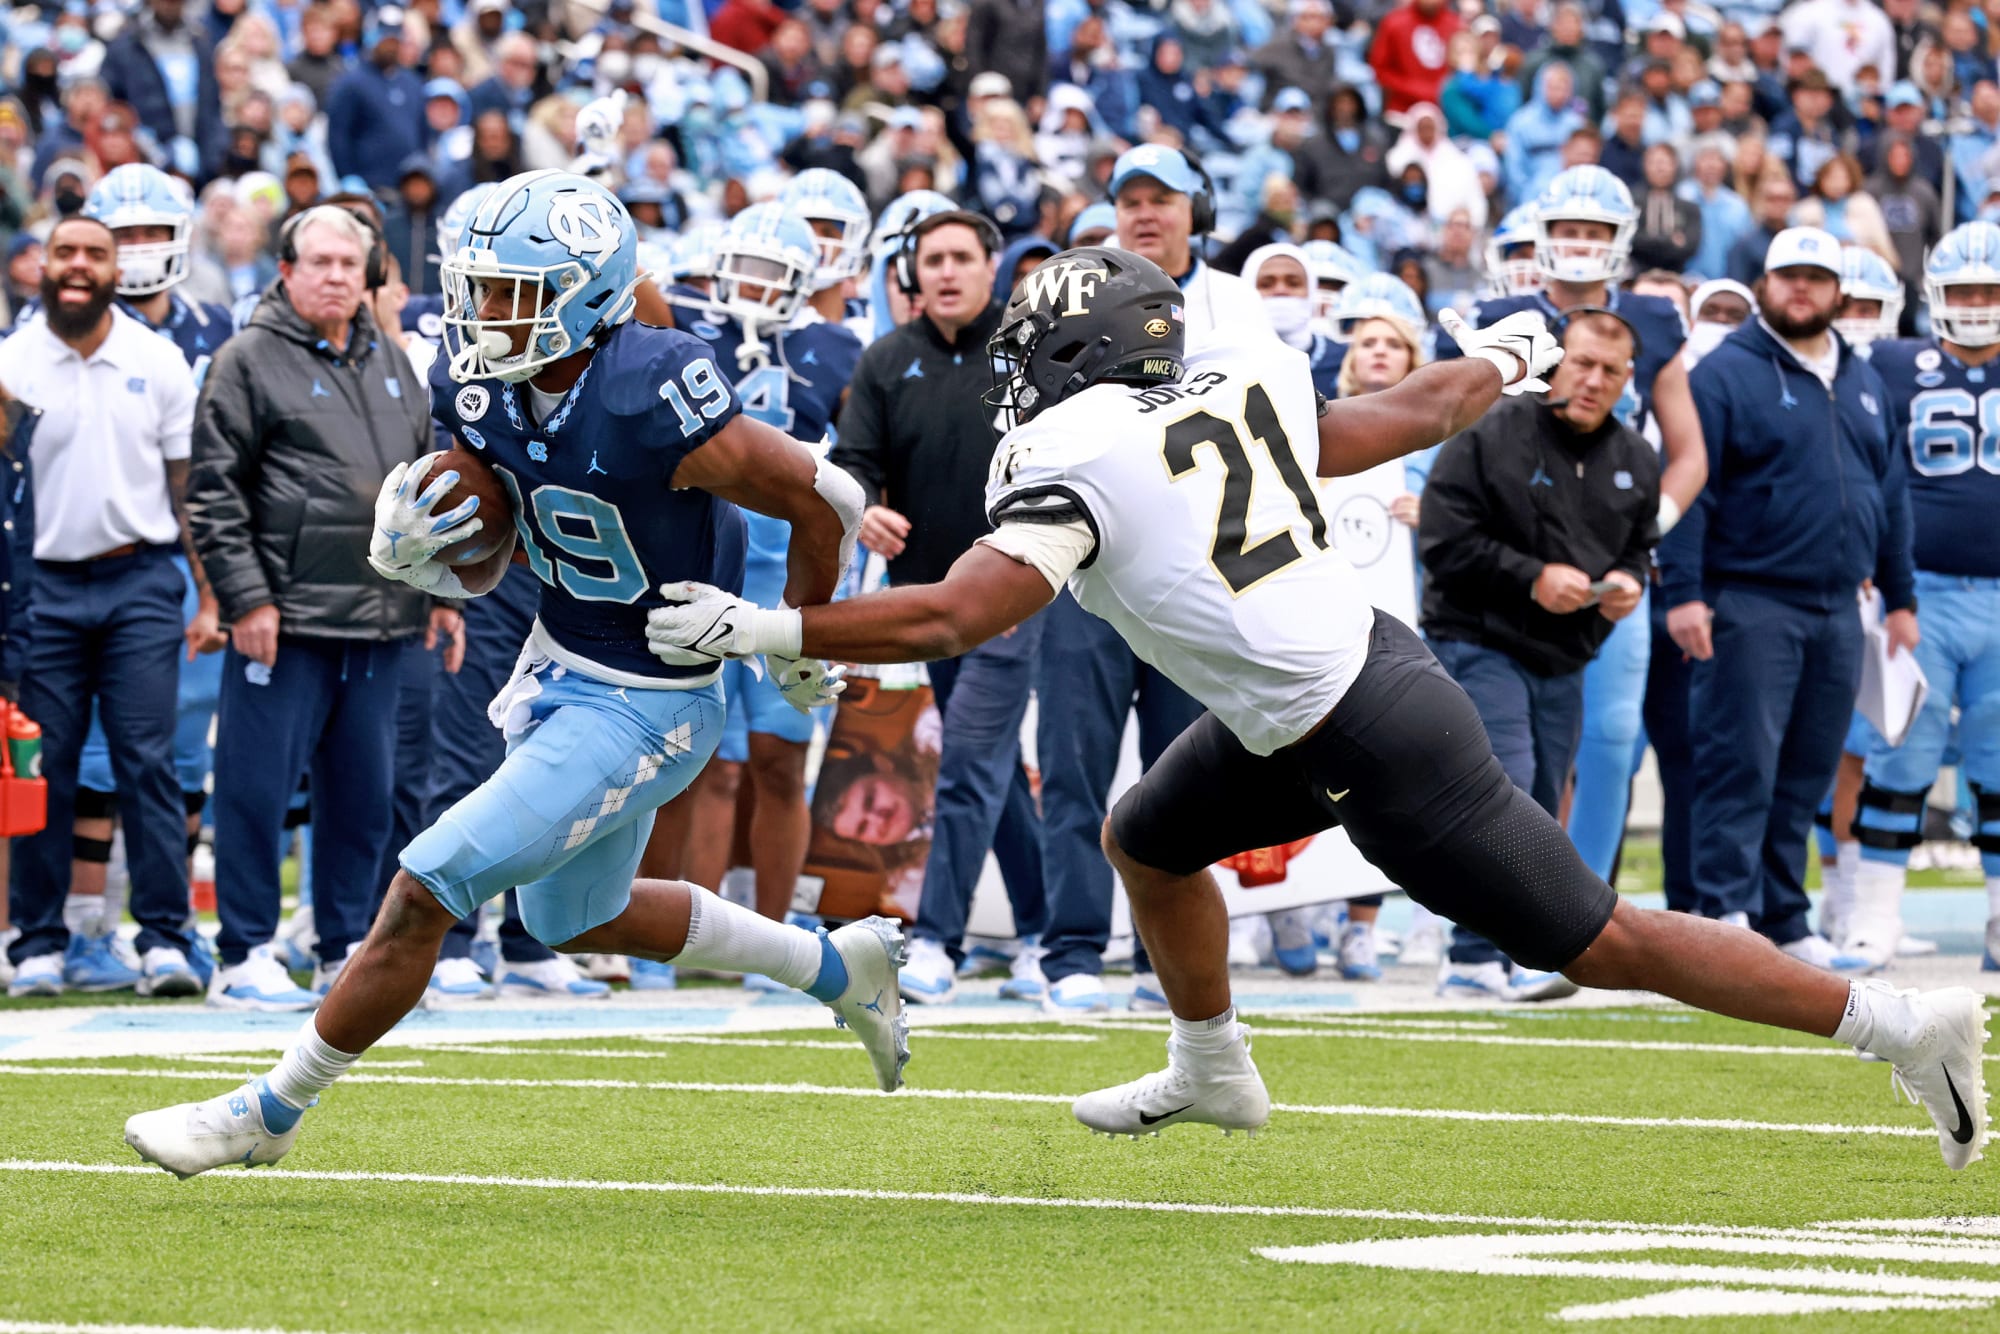 UNC running back Ty Chandler has historic day in win over Wake Forest